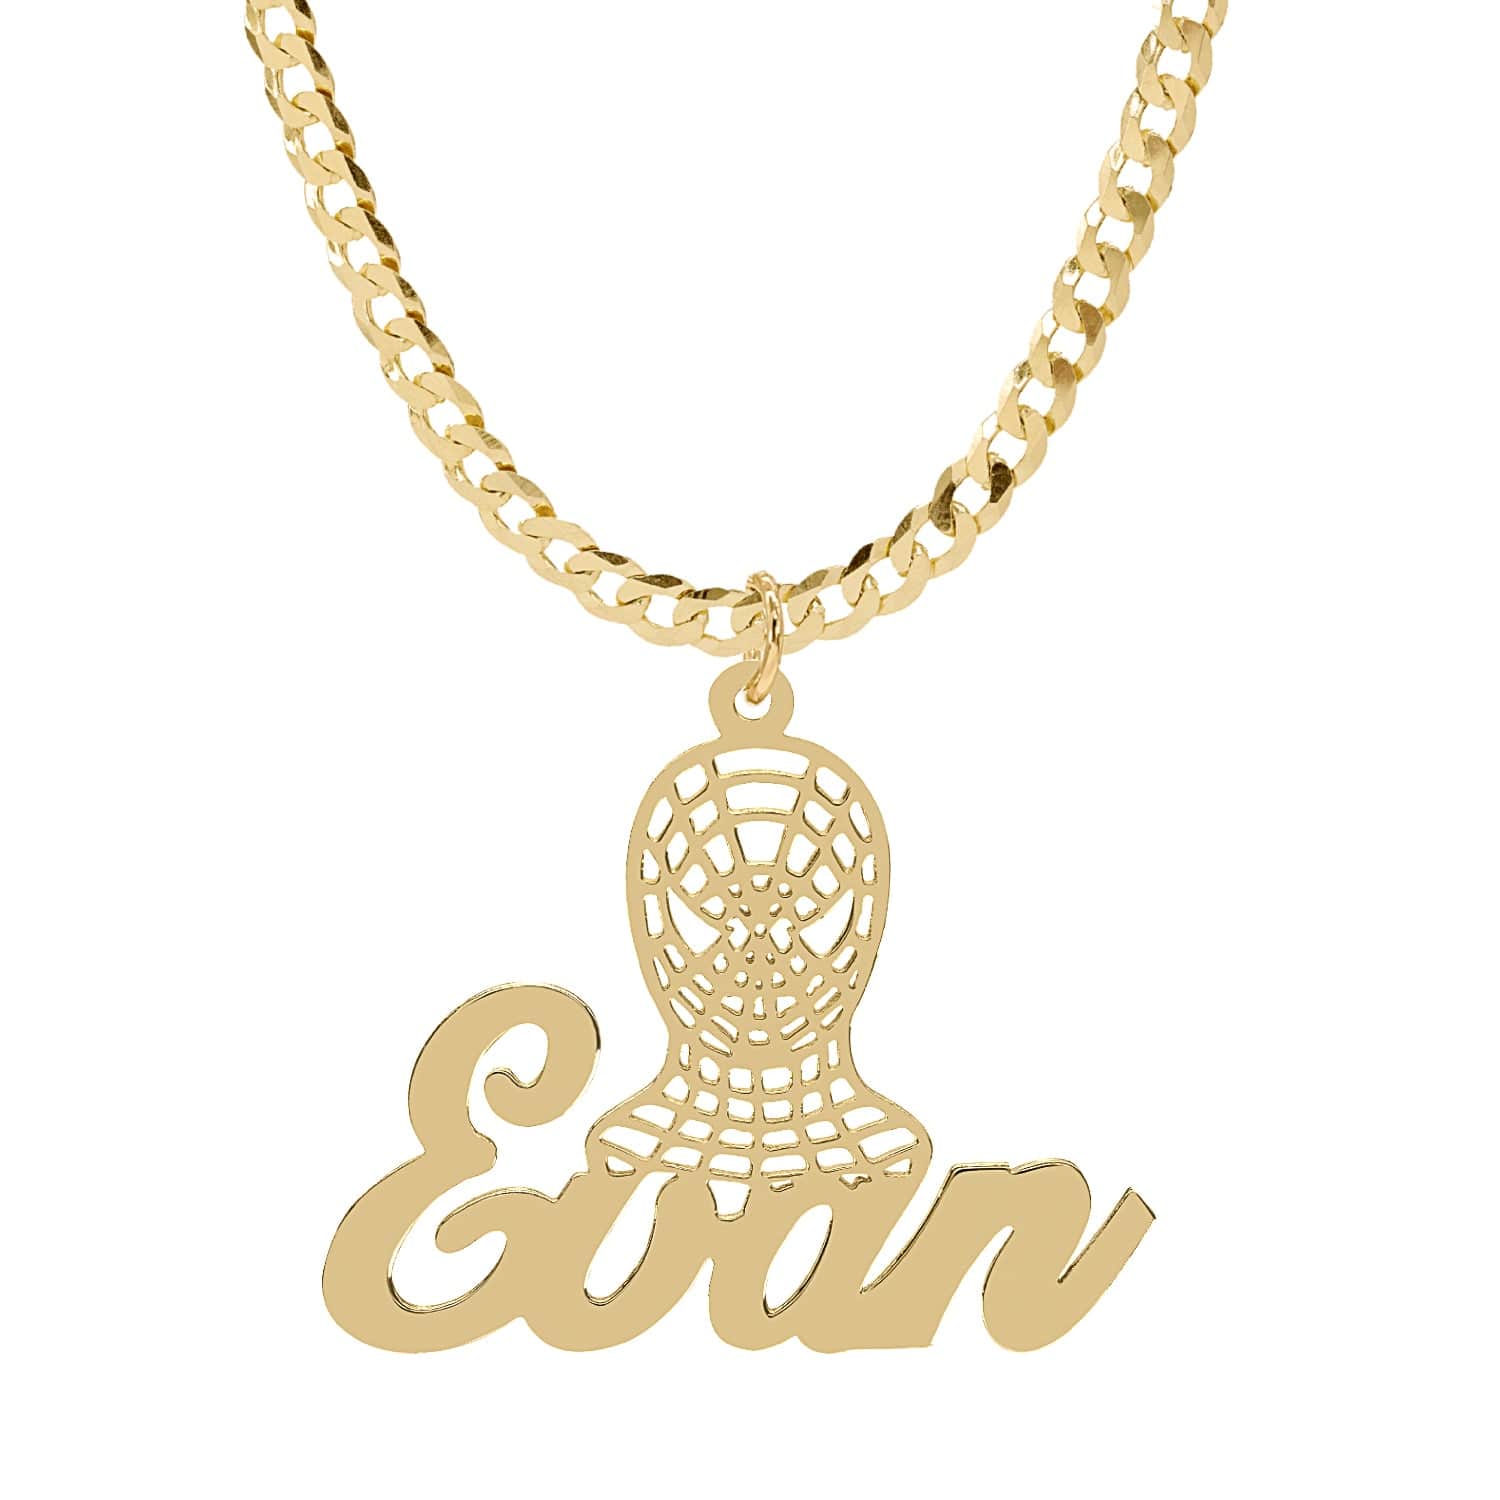 14K Gold over Sterling Silver / Cuban Chain Copy of Personalized Name necklace with Diamond Cut "Sekani"